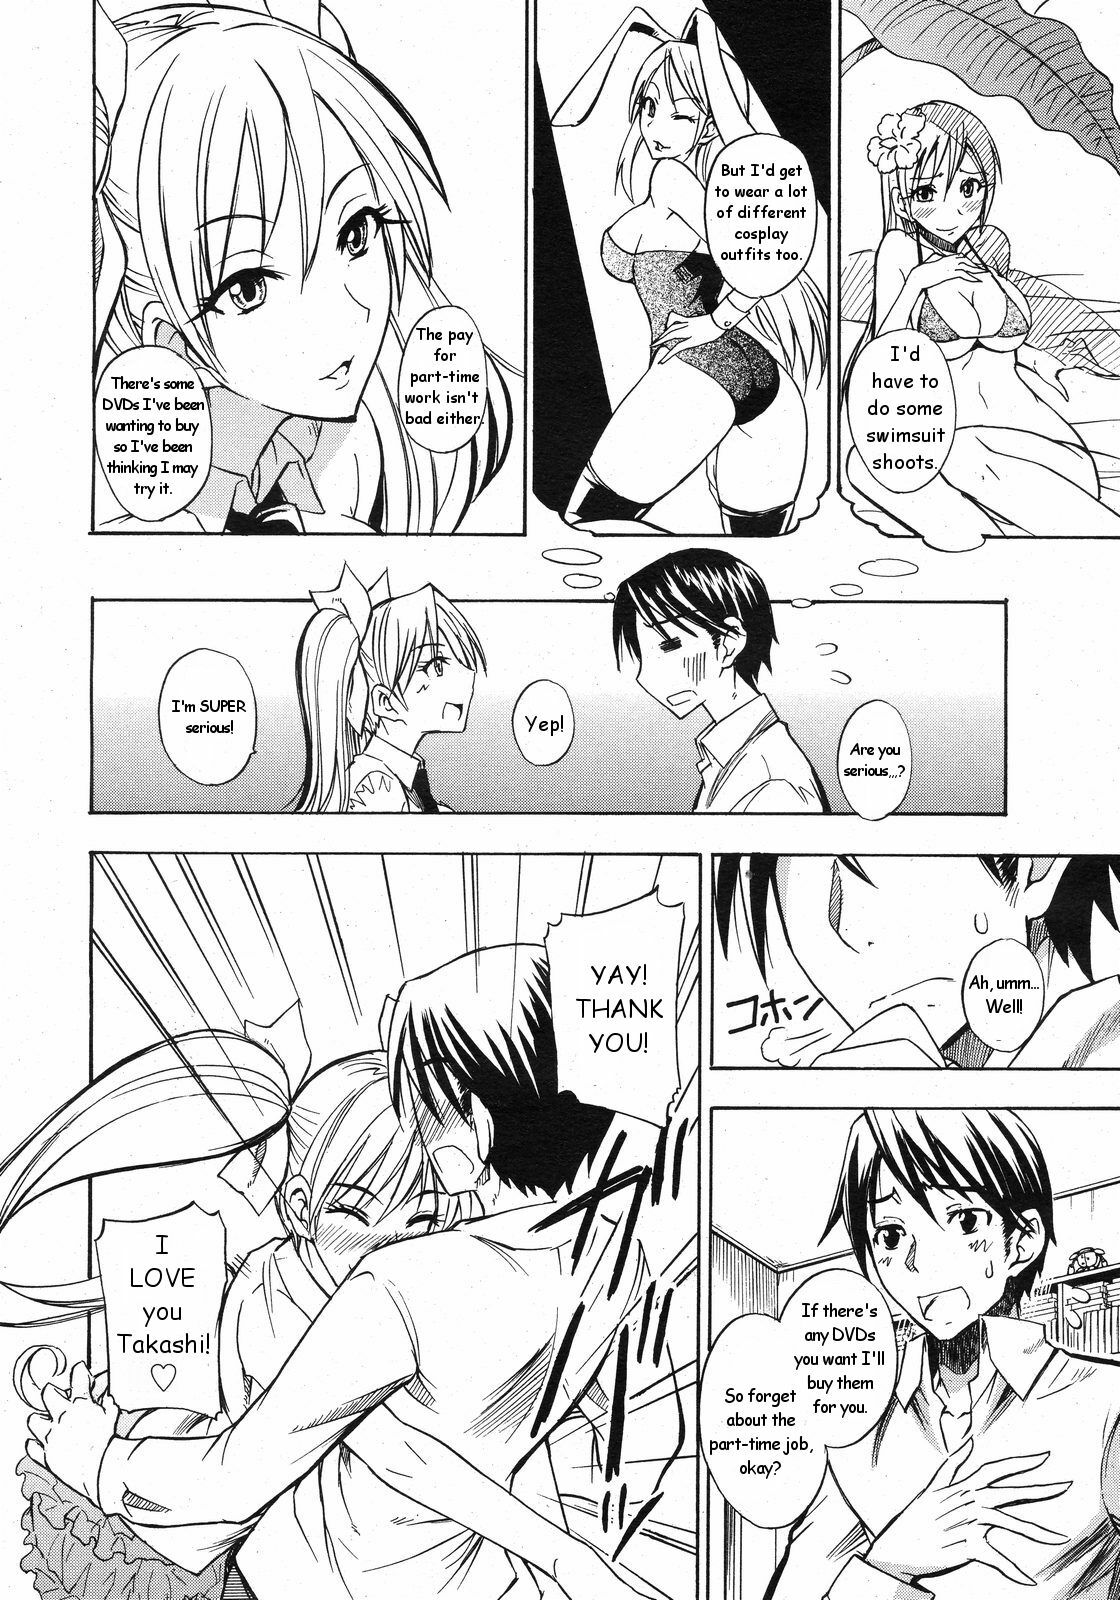 [Isao] Itazura Kami no Musume | Tricky Twintails Girl (COMIC 0EX Vol. 13 2009-01) [English] [Oronae] page 6 full